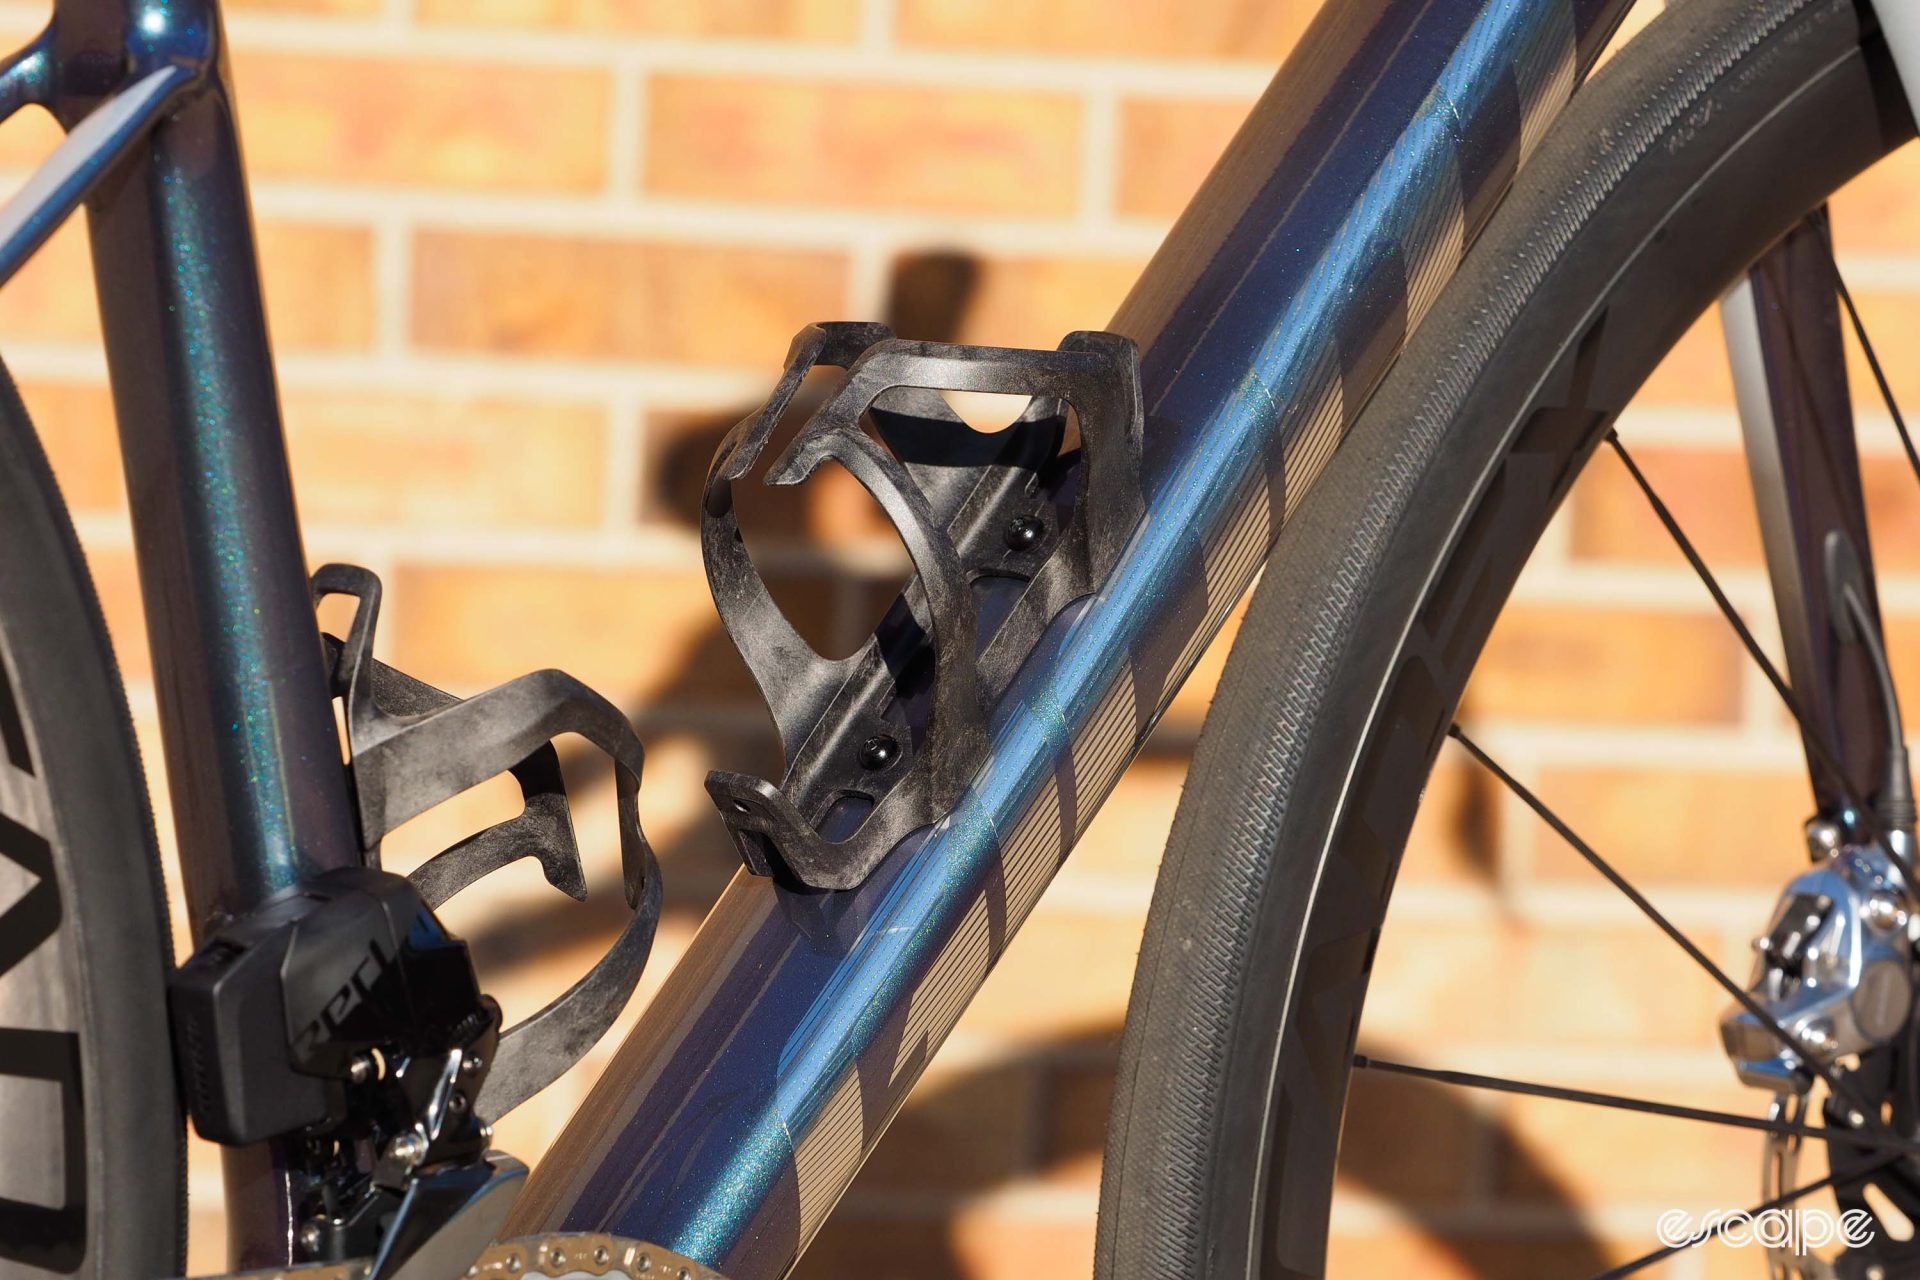 Giant includes two composite bottle cages. The cages are sculpted to fit the tubes nicely, with clean flowing lines.